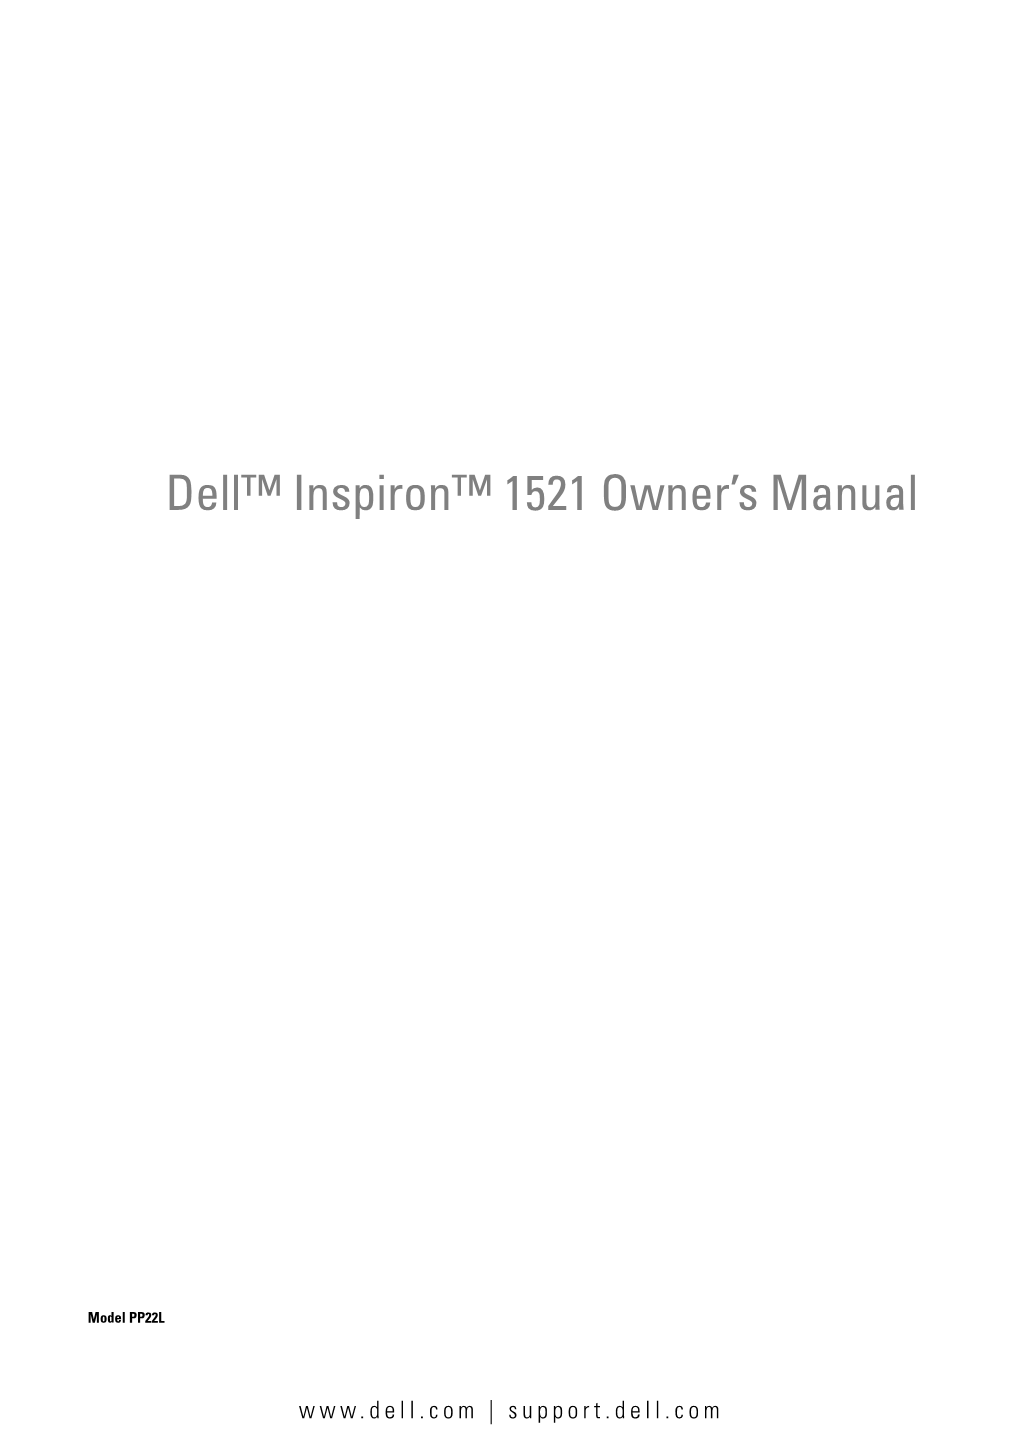 Inspiron 1521 Owner's Manual